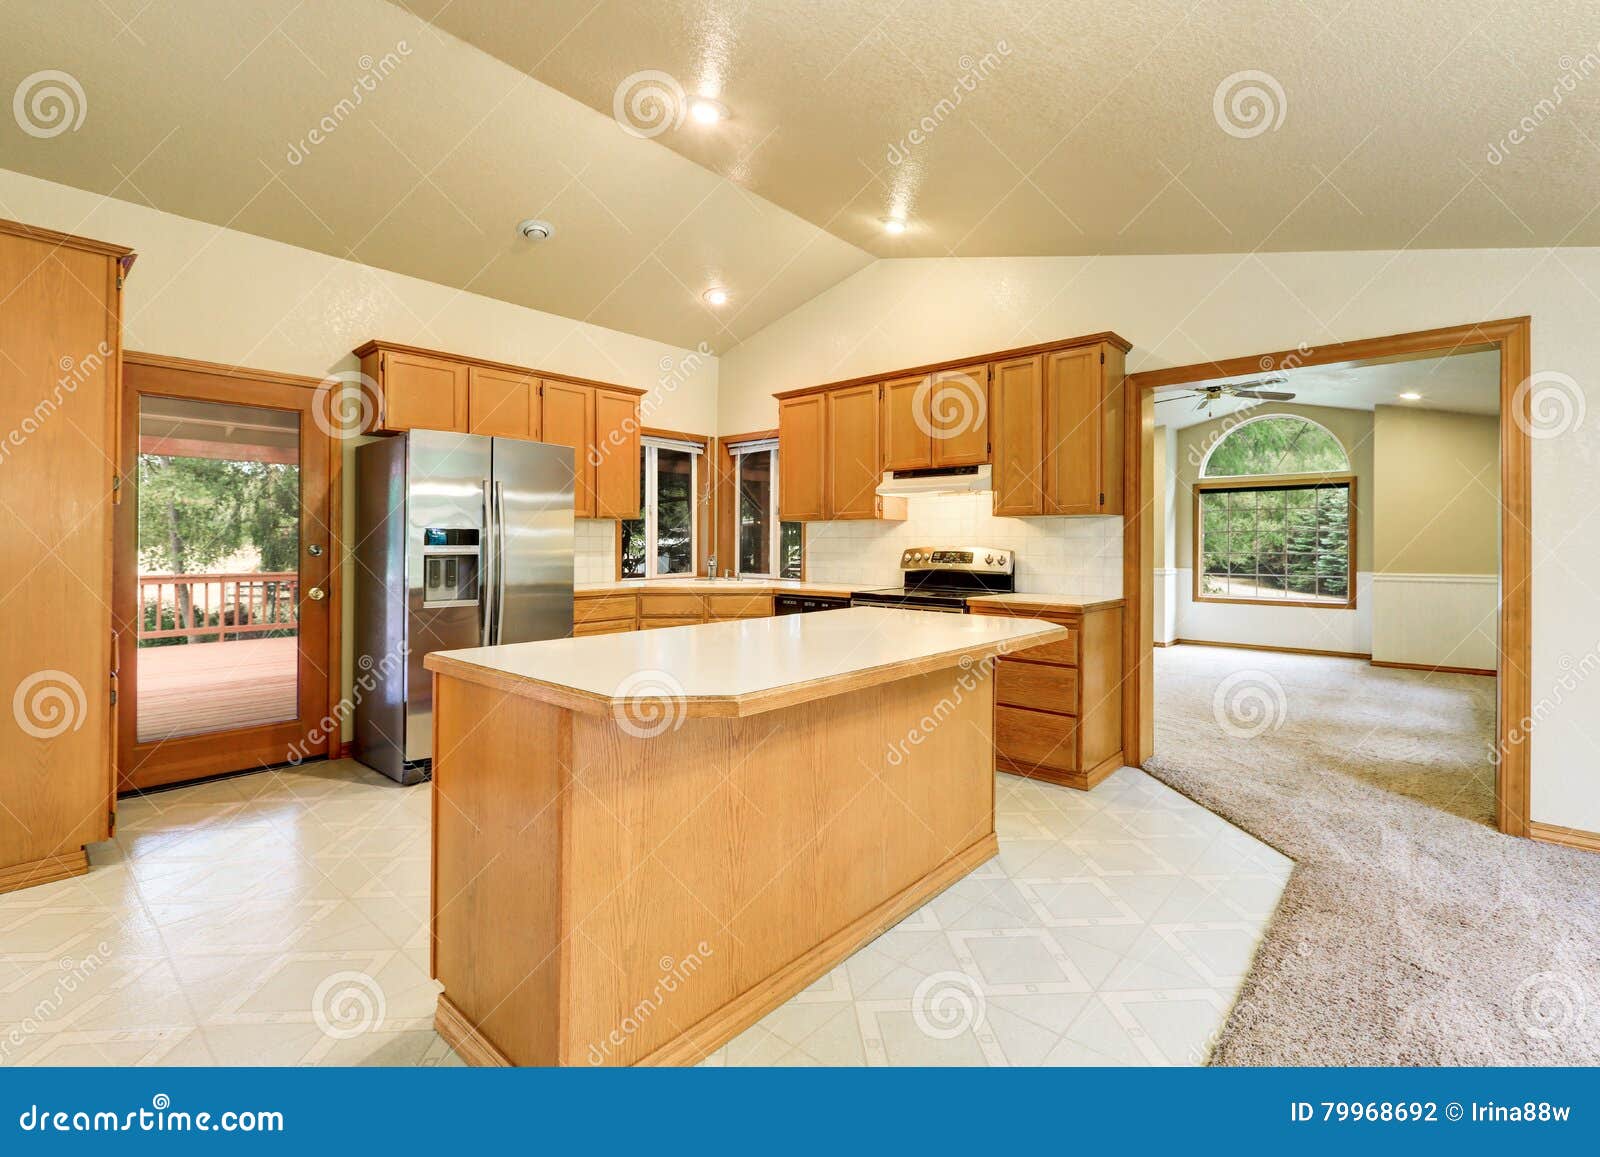 Kitchen Room Interior In The Horse Ranch Stock Photo Image Of